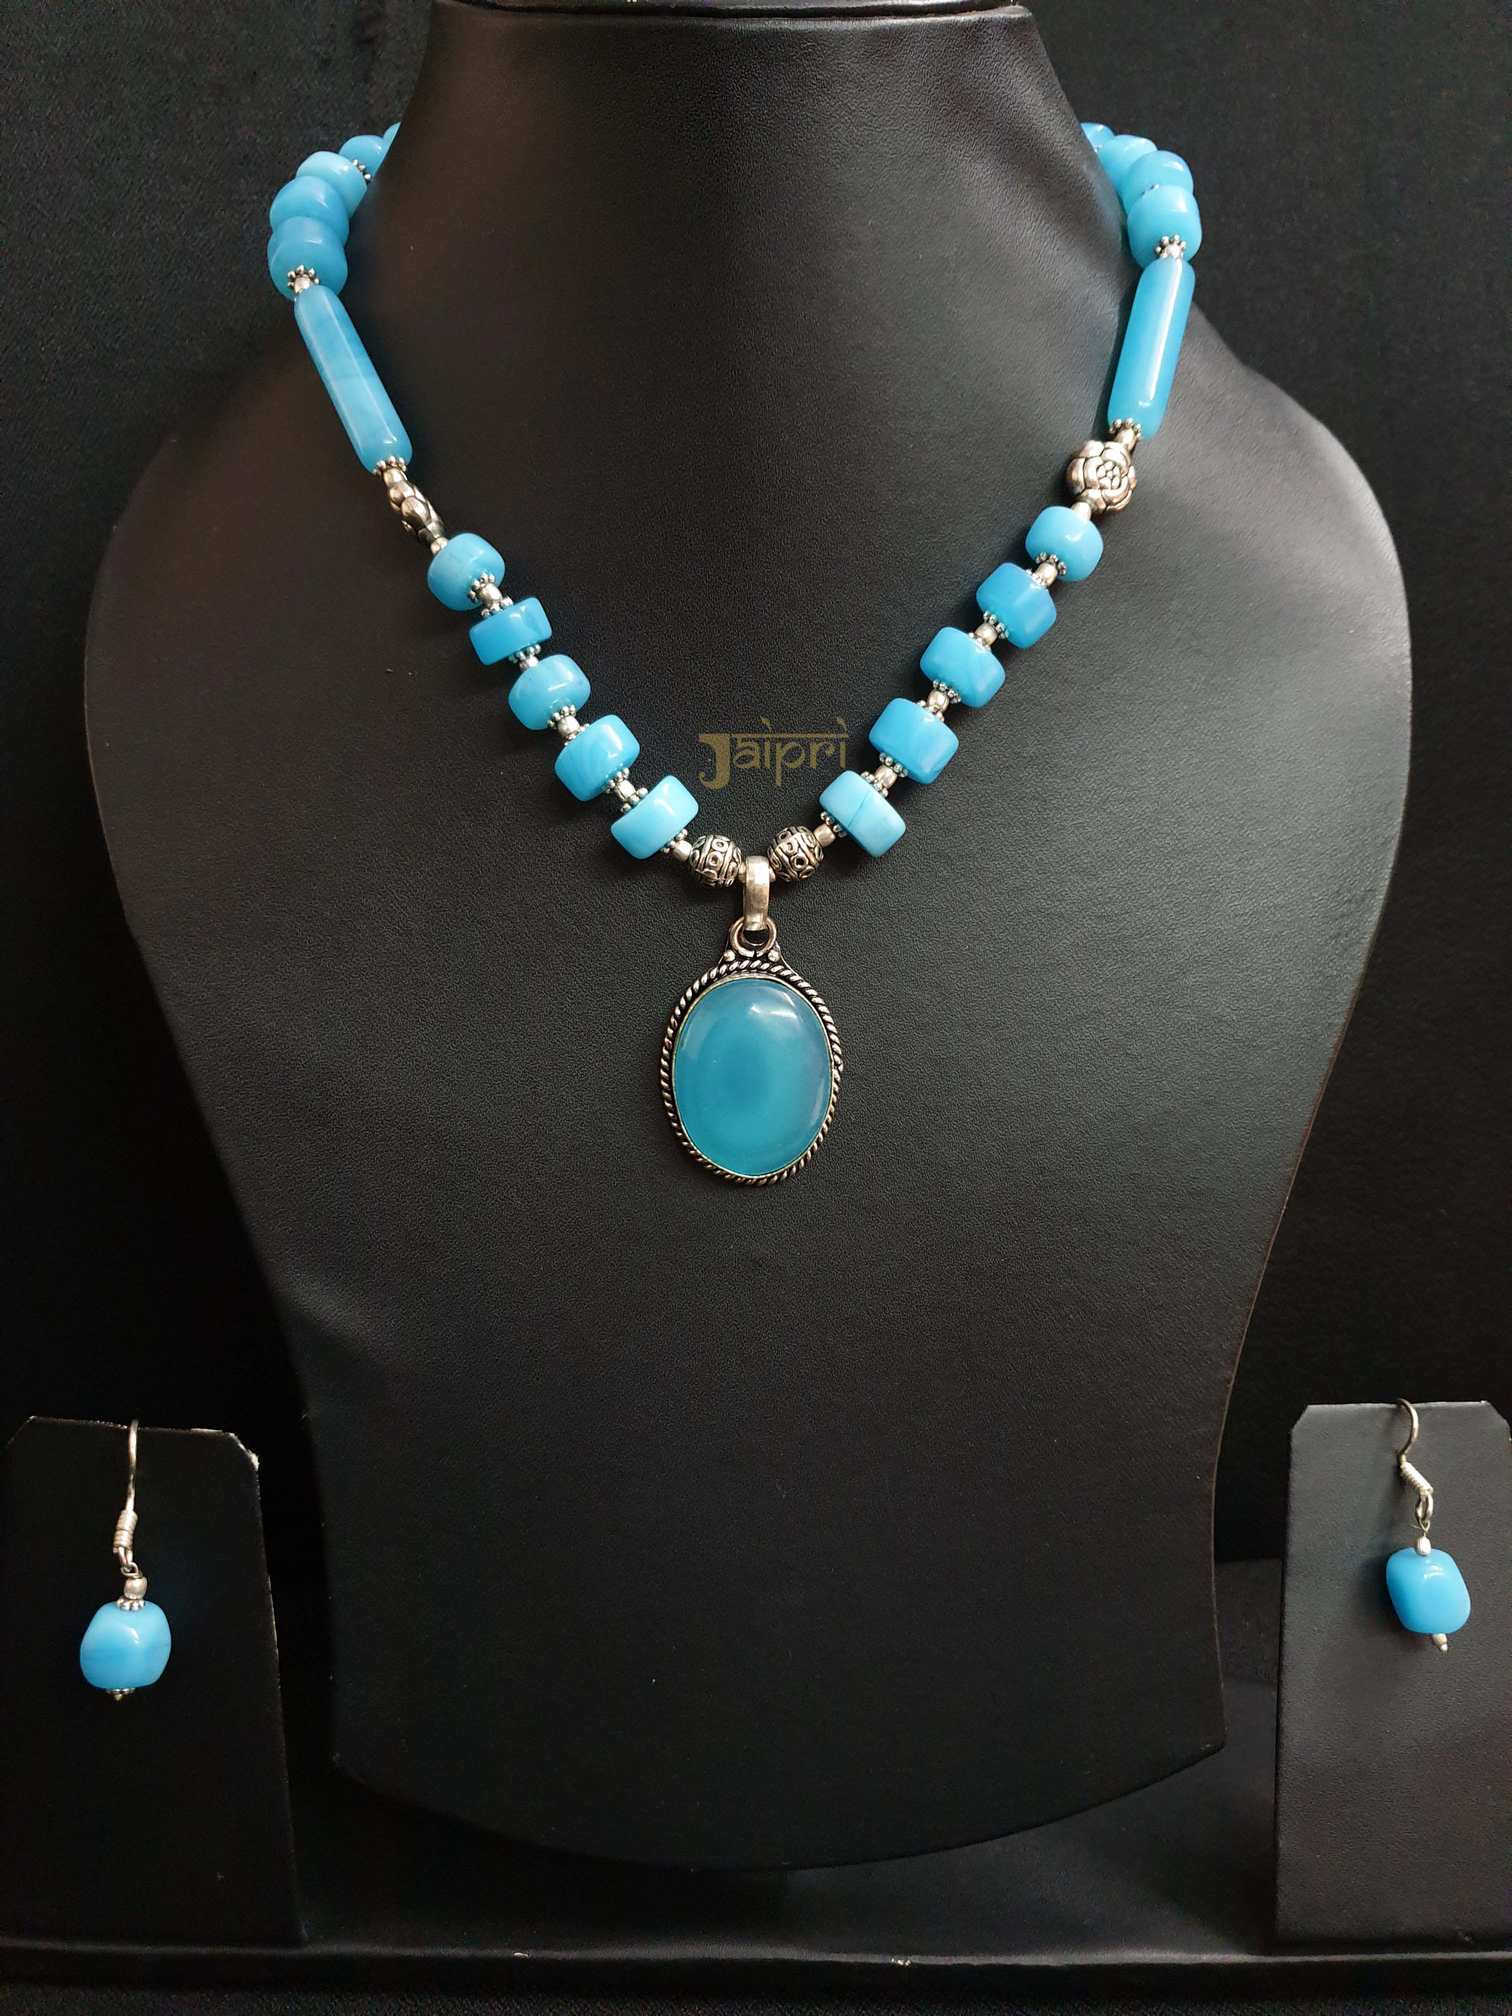 Adorable Turquoise Beads Stone, Oval Necklace With Earrings